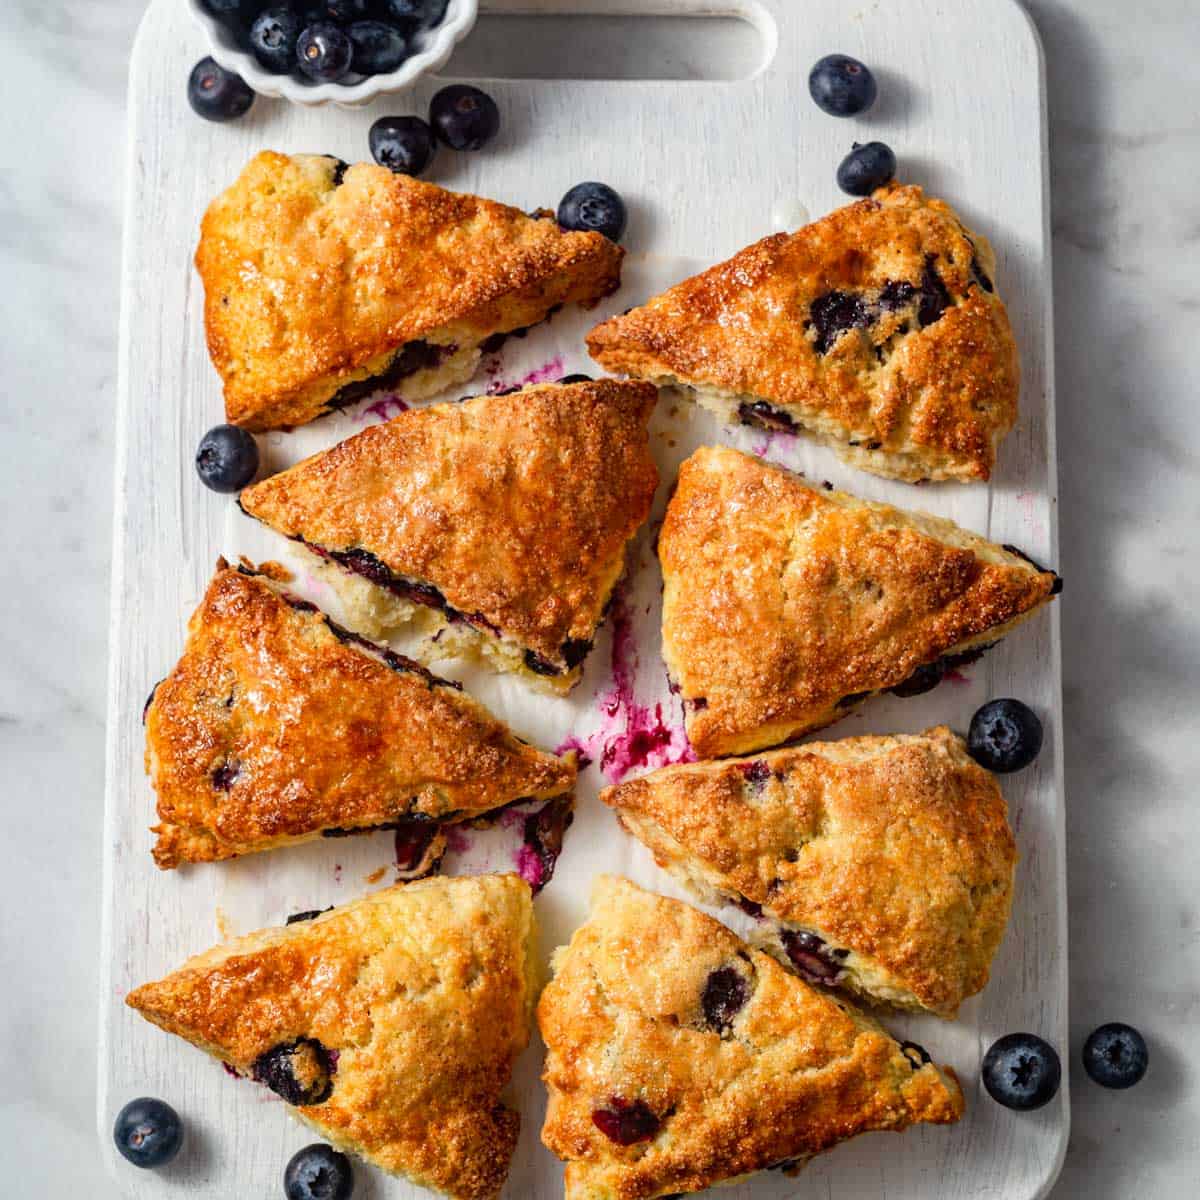 Overhead view of air-fried blueberry scones placed on a white plate along with fresh blueberries on them.